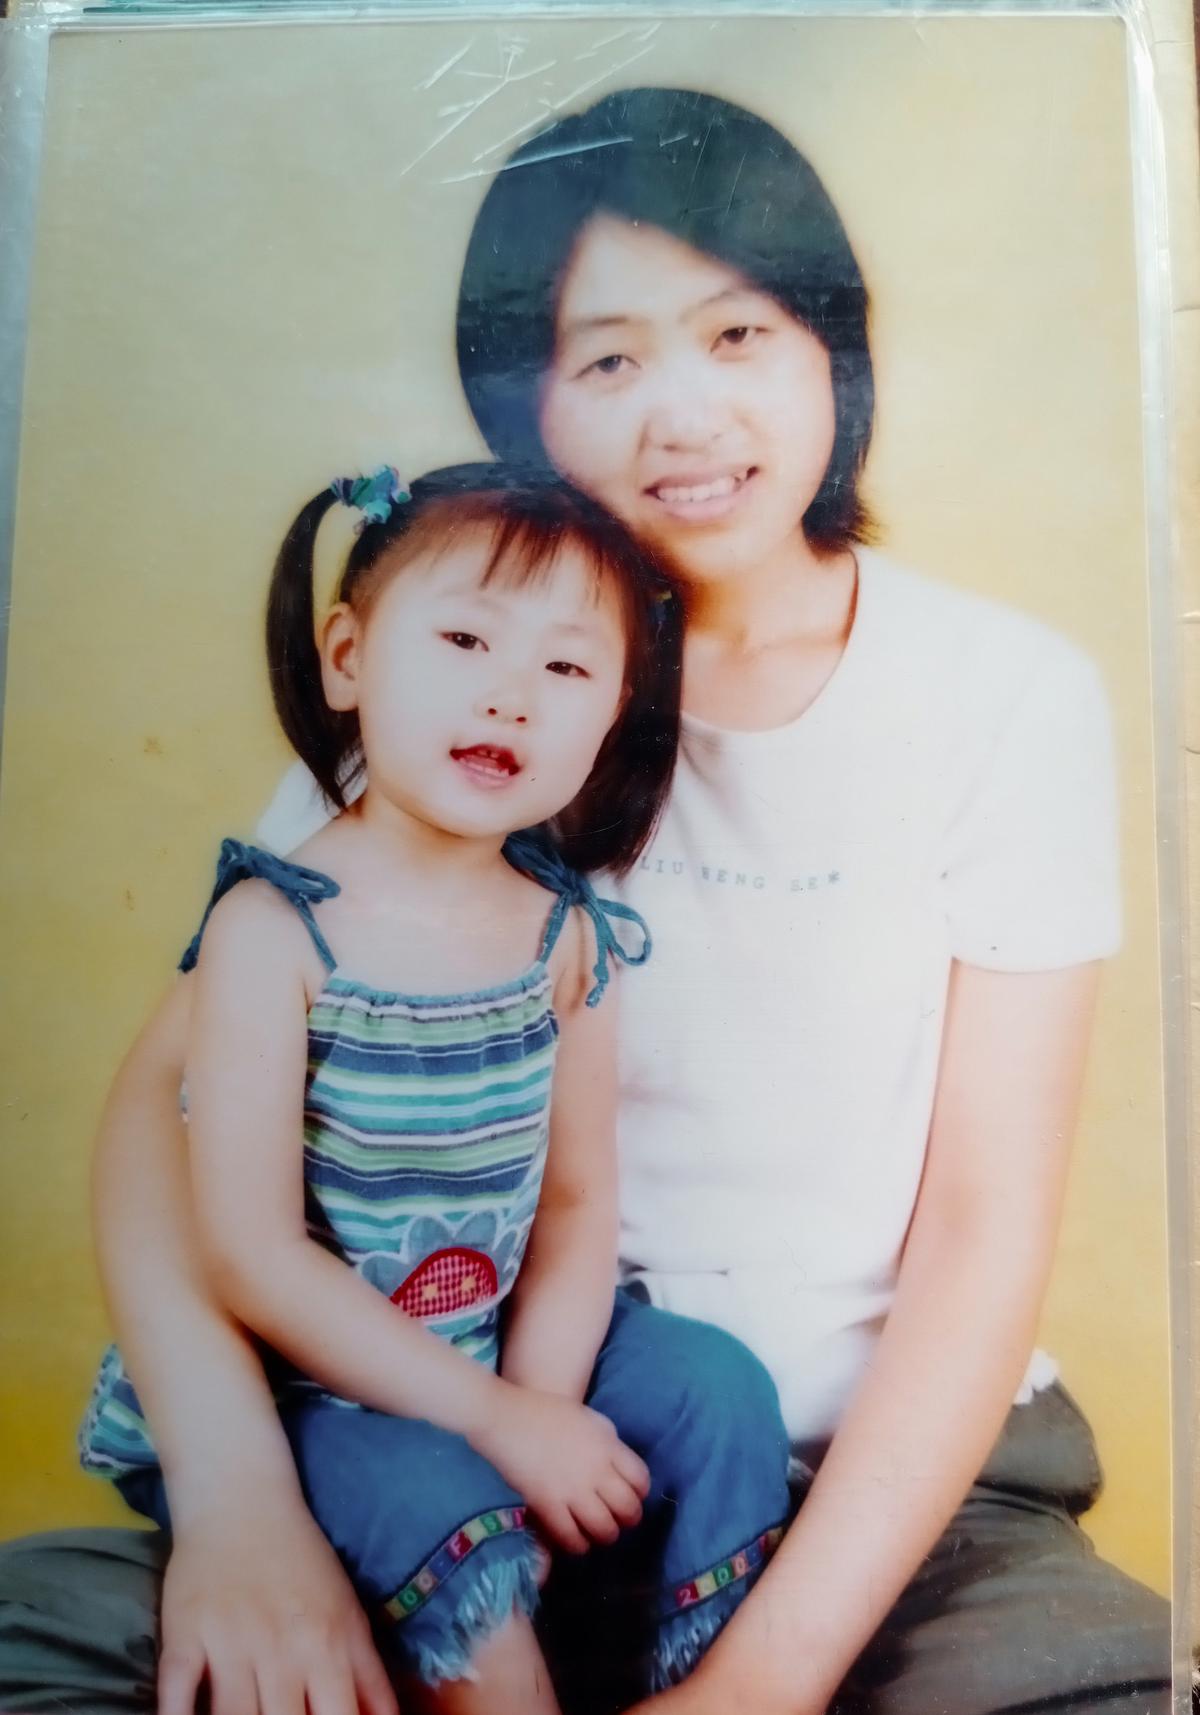 Zhang Minghui and her mother while her father was in detention, in Shandong Province, China, in 2000. (Courtesy of Zhang Minghui)